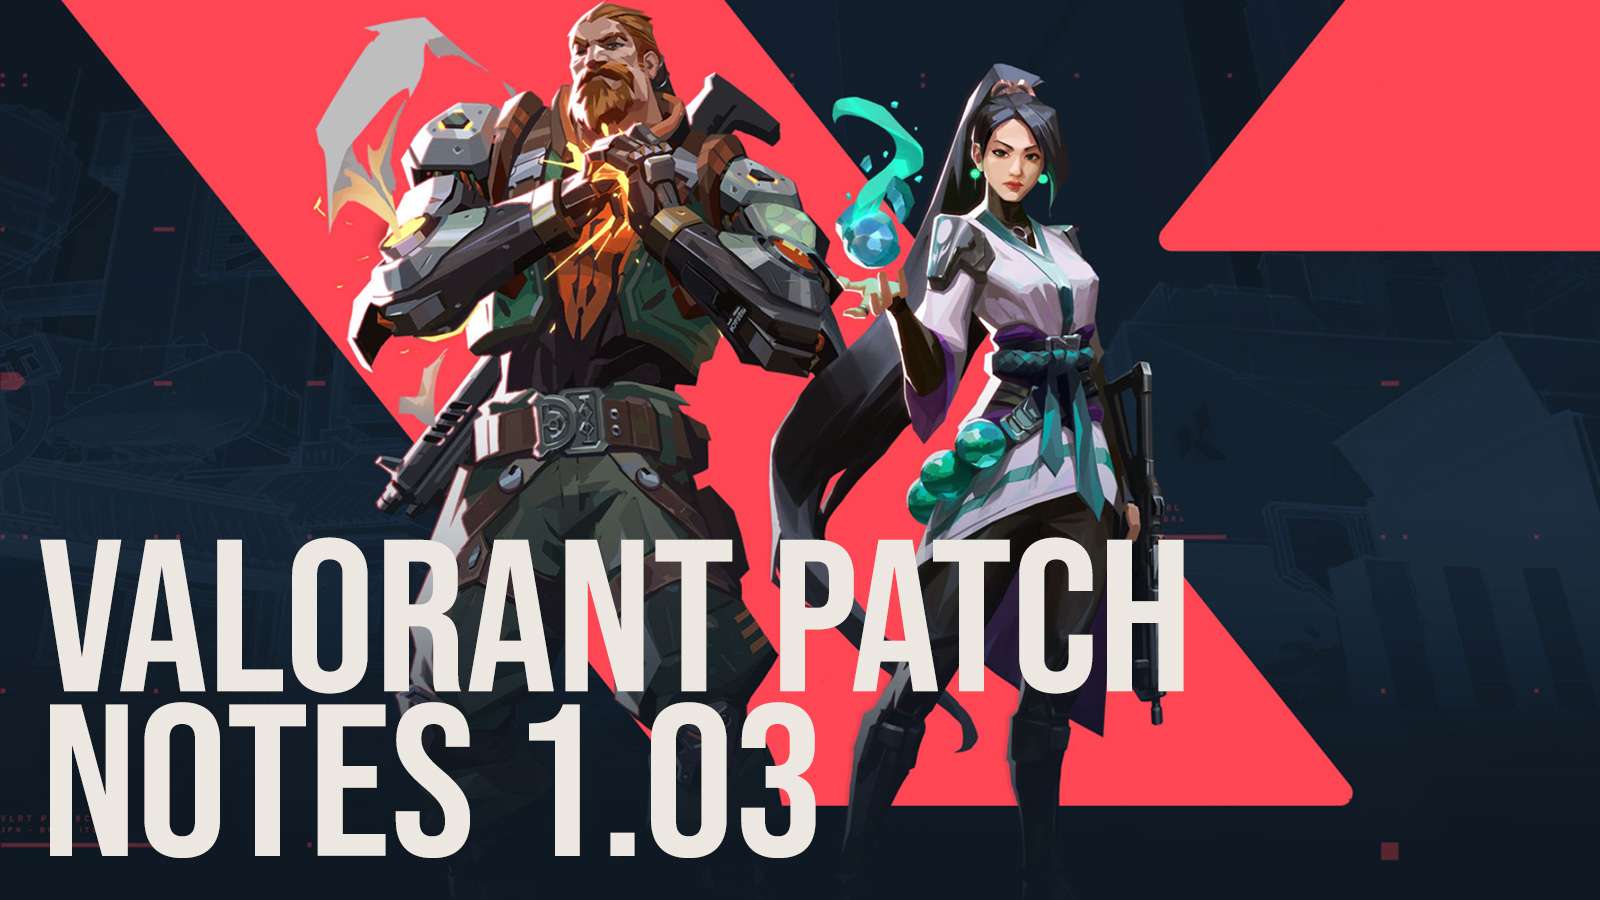 Valorant Patch Notes 1.03